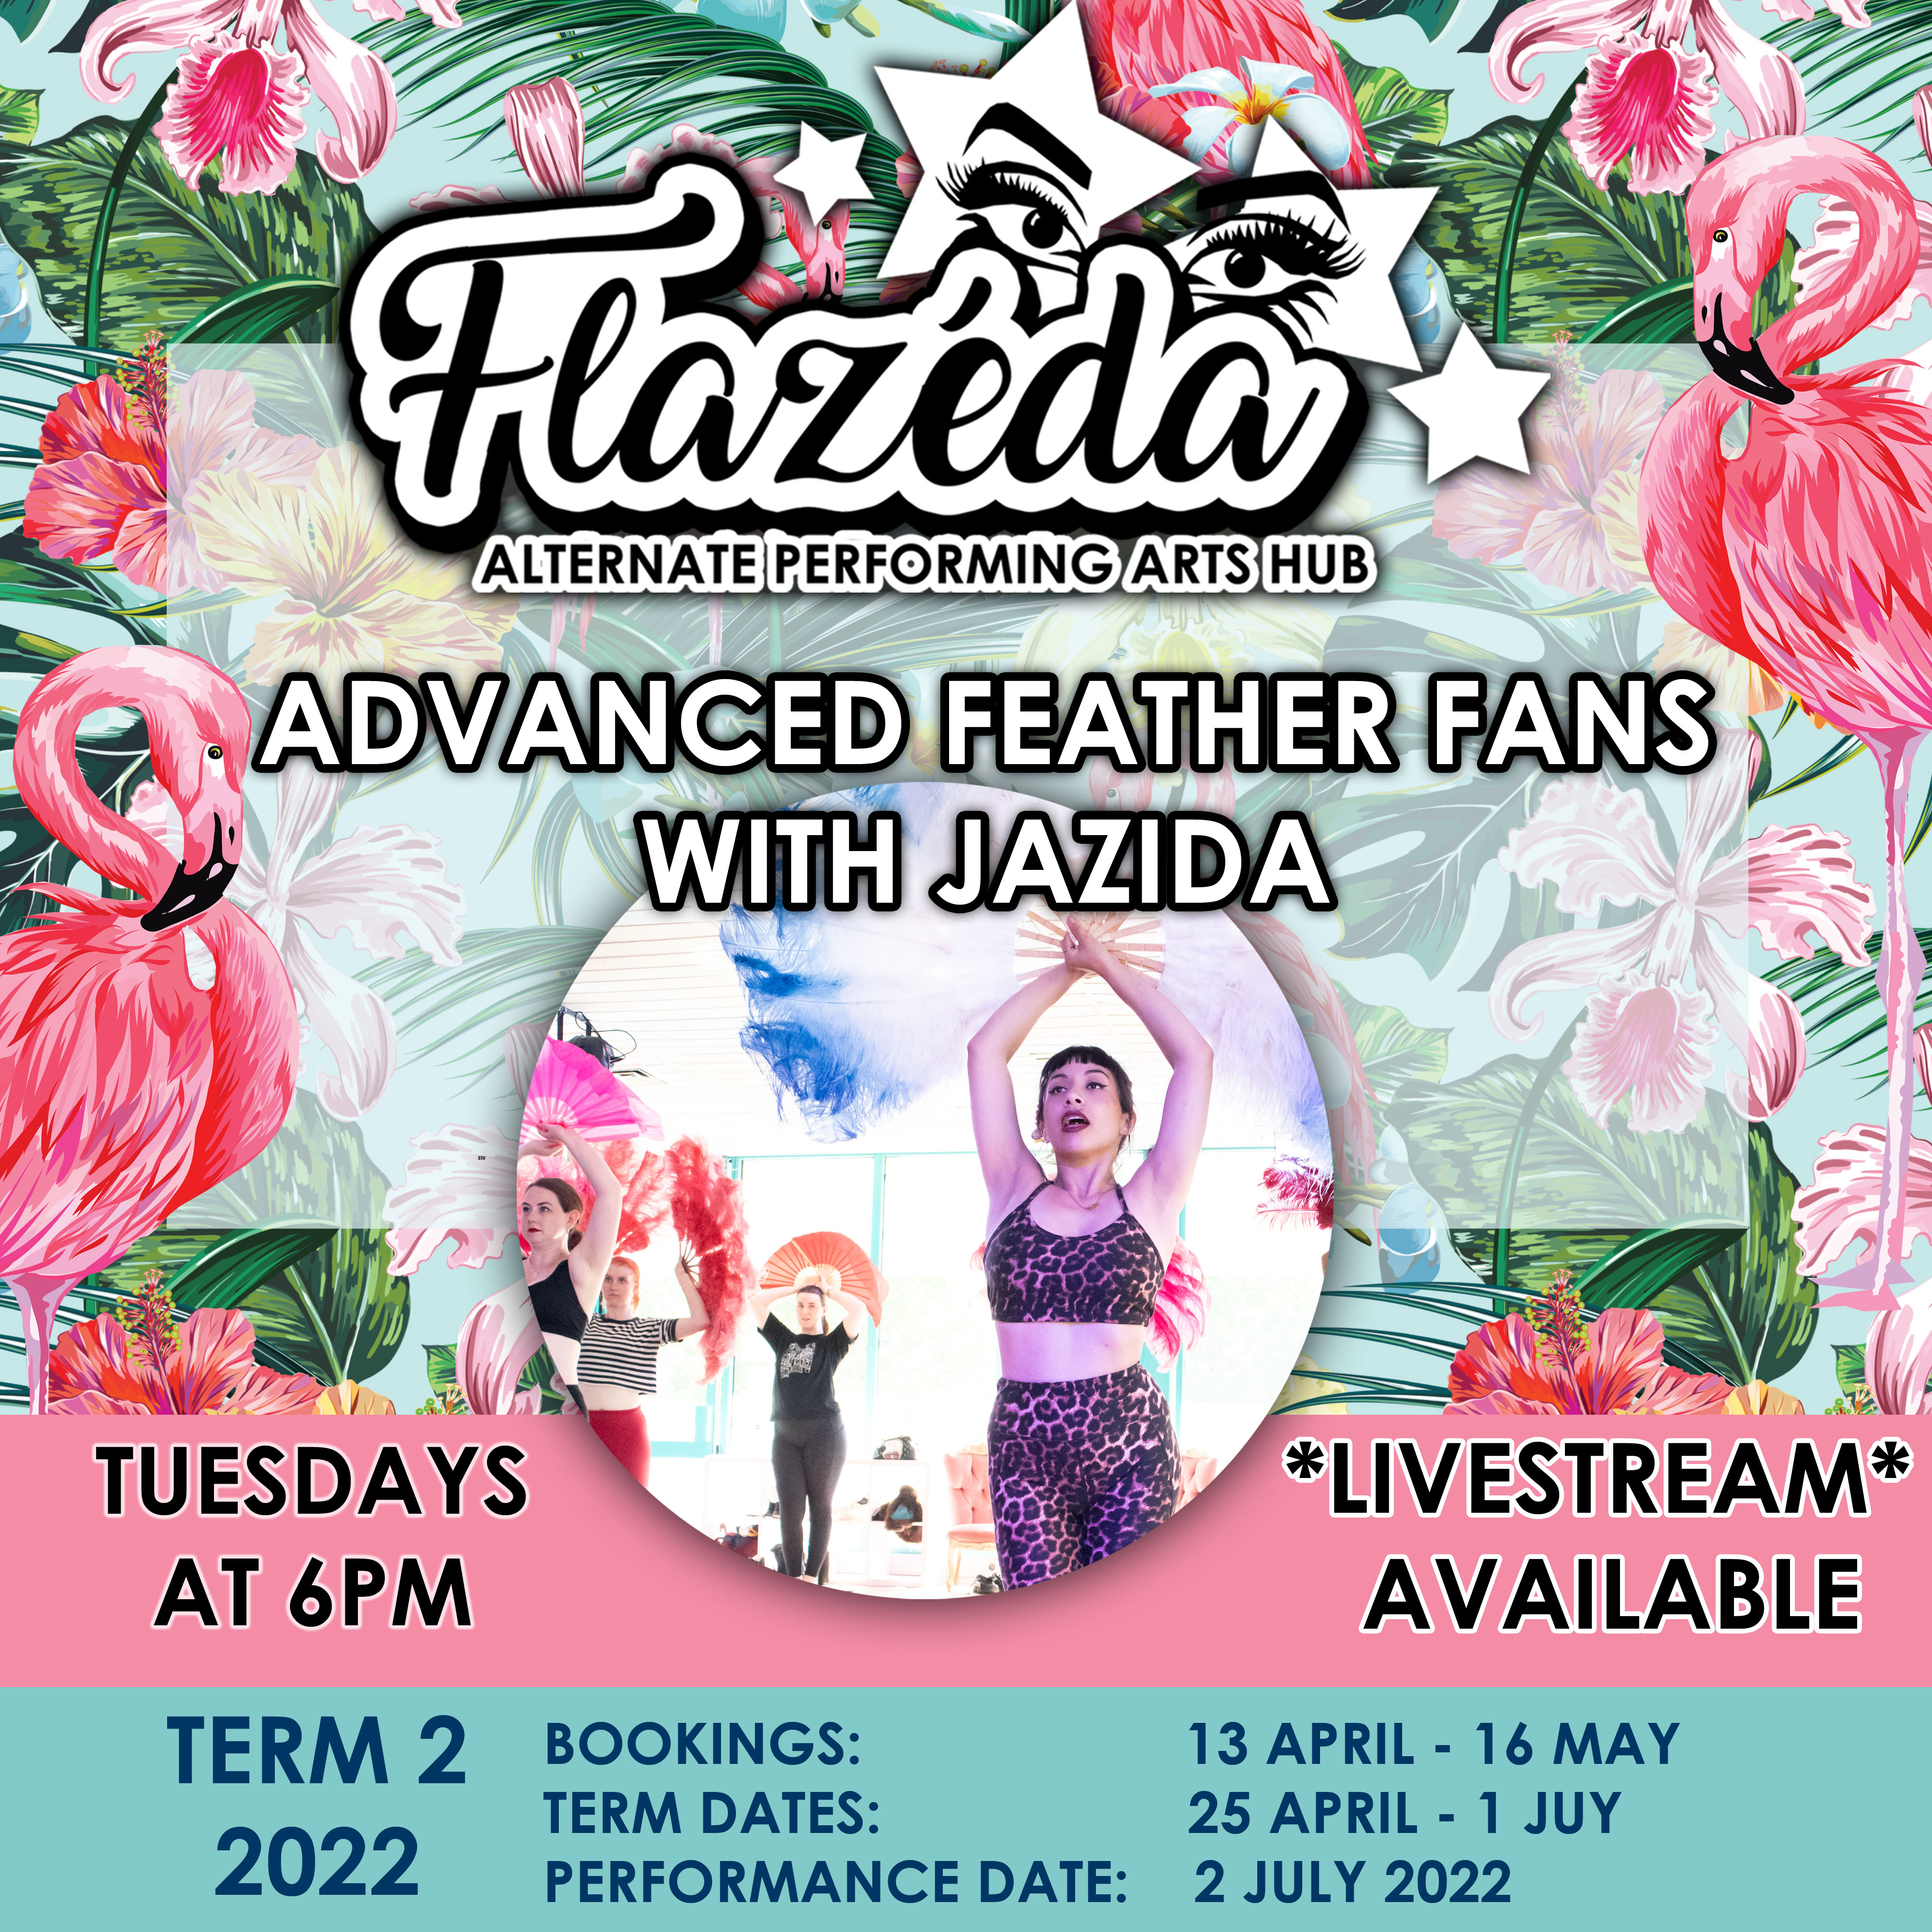 Advanced Feather Fans with Jazida